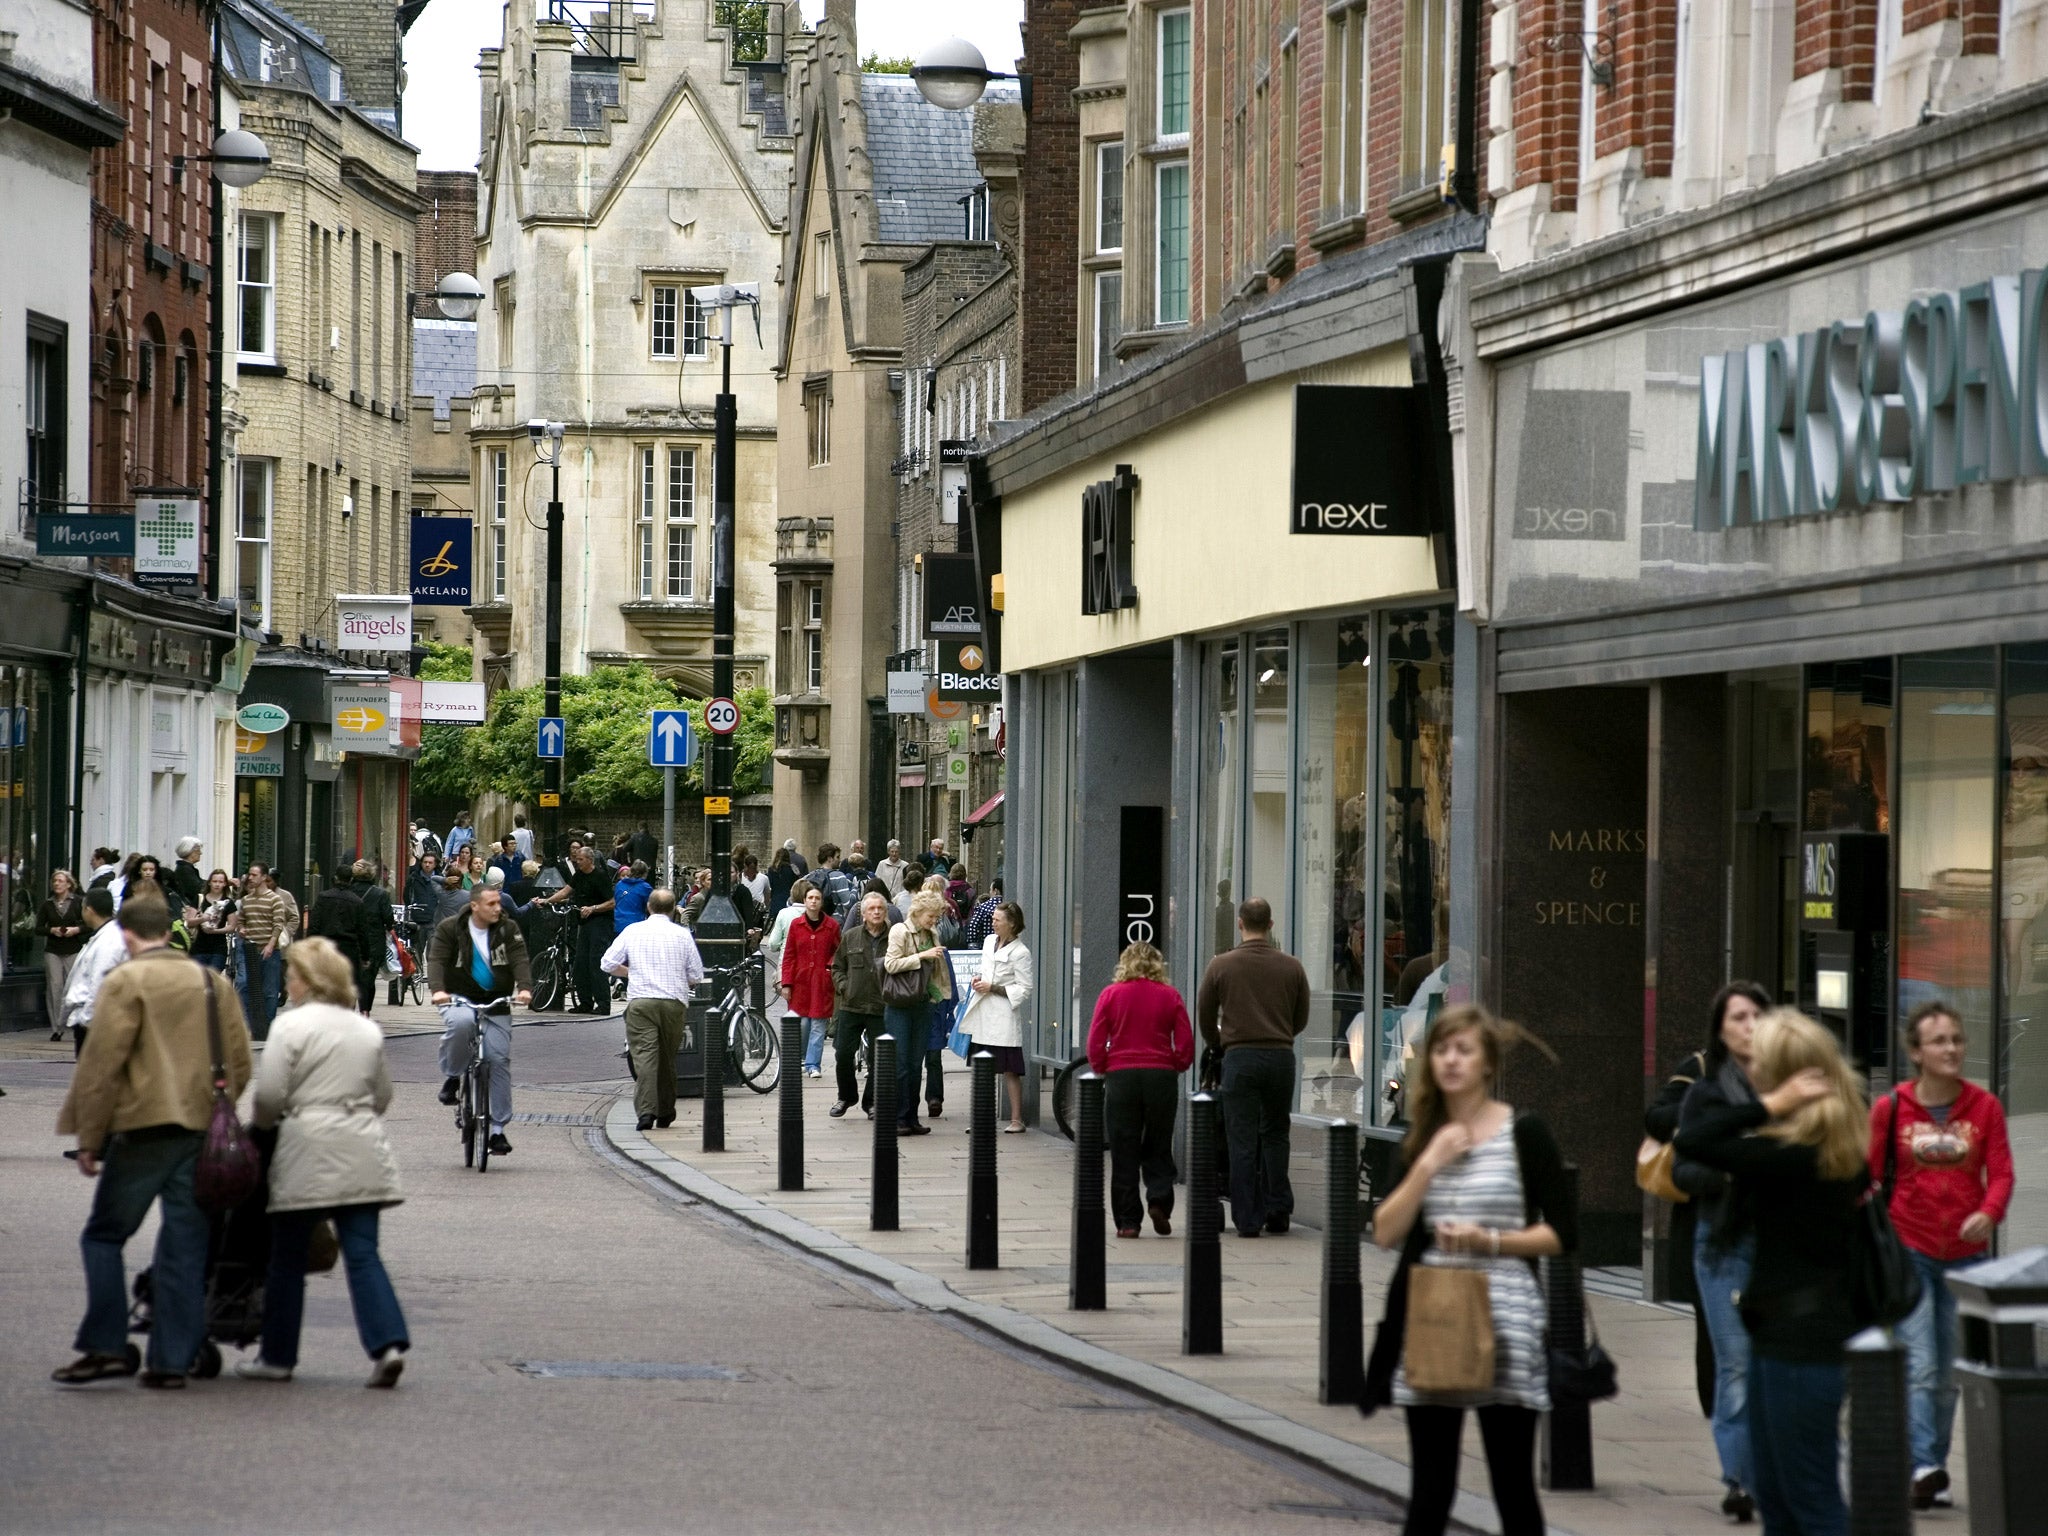 Councils are pulling out all the stops to attract more people to the high street